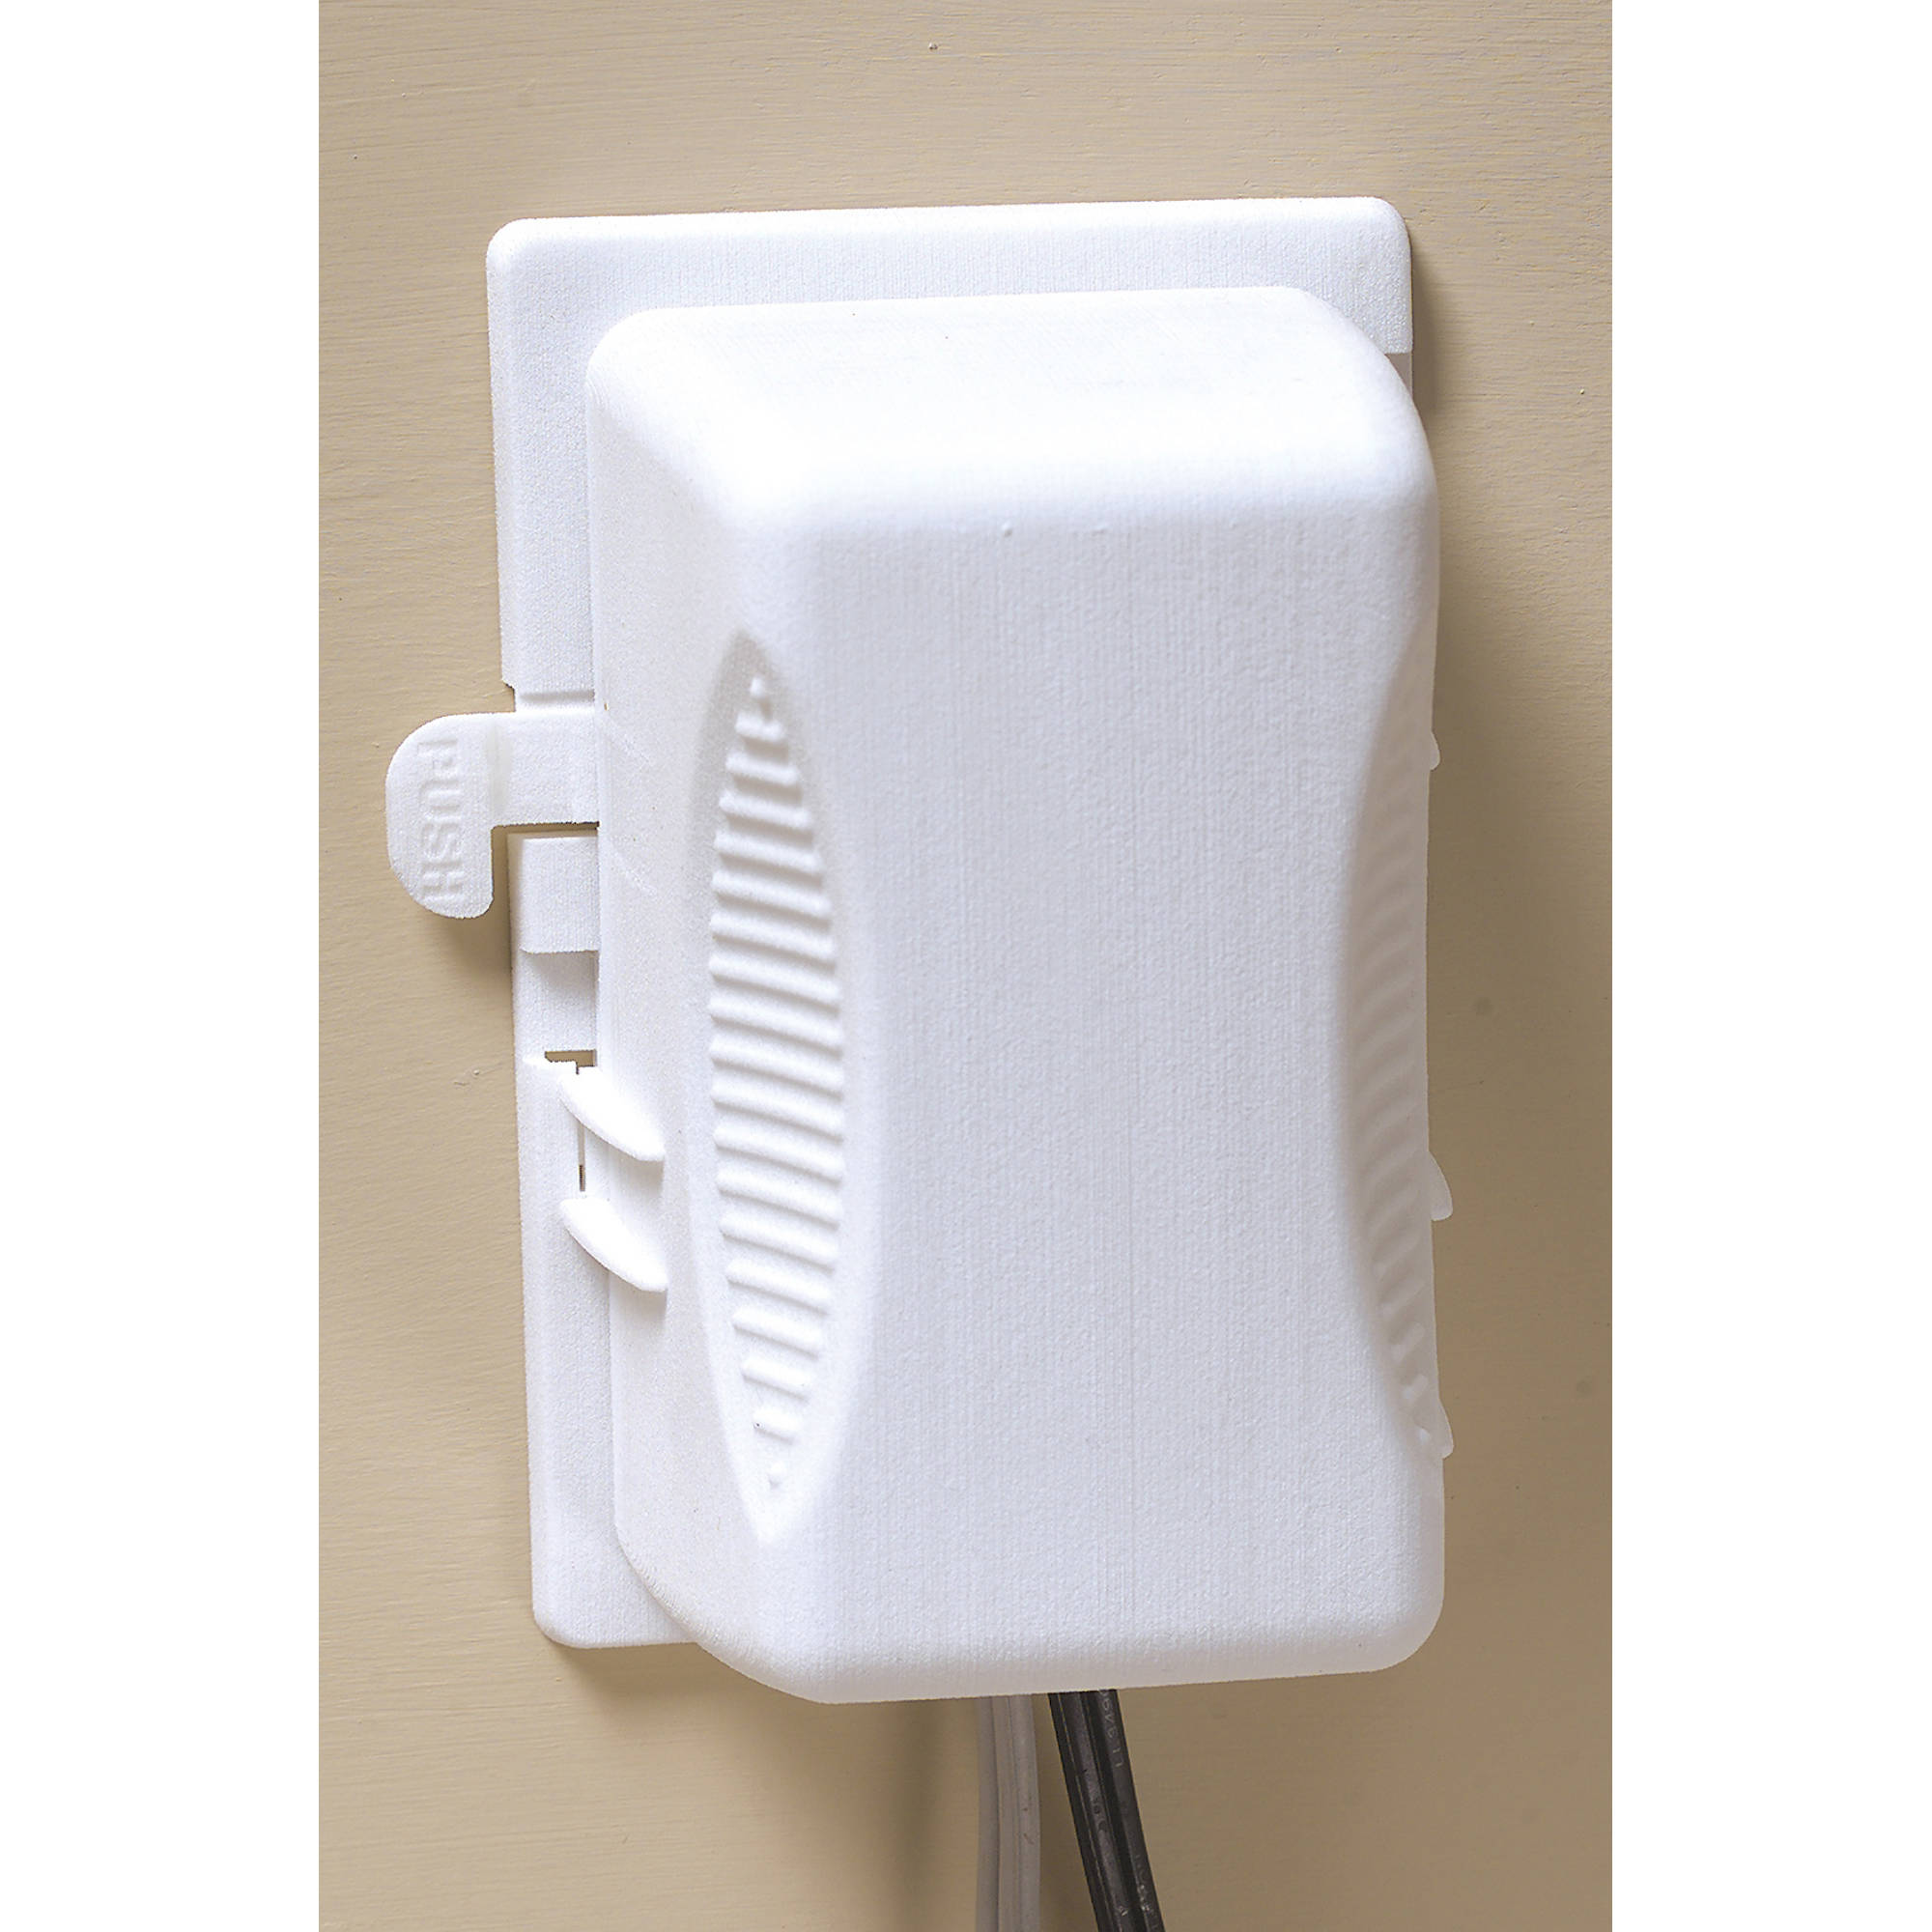 KidCo Child Safety Outlet Plug Cover, White, Plastic - image 1 of 7